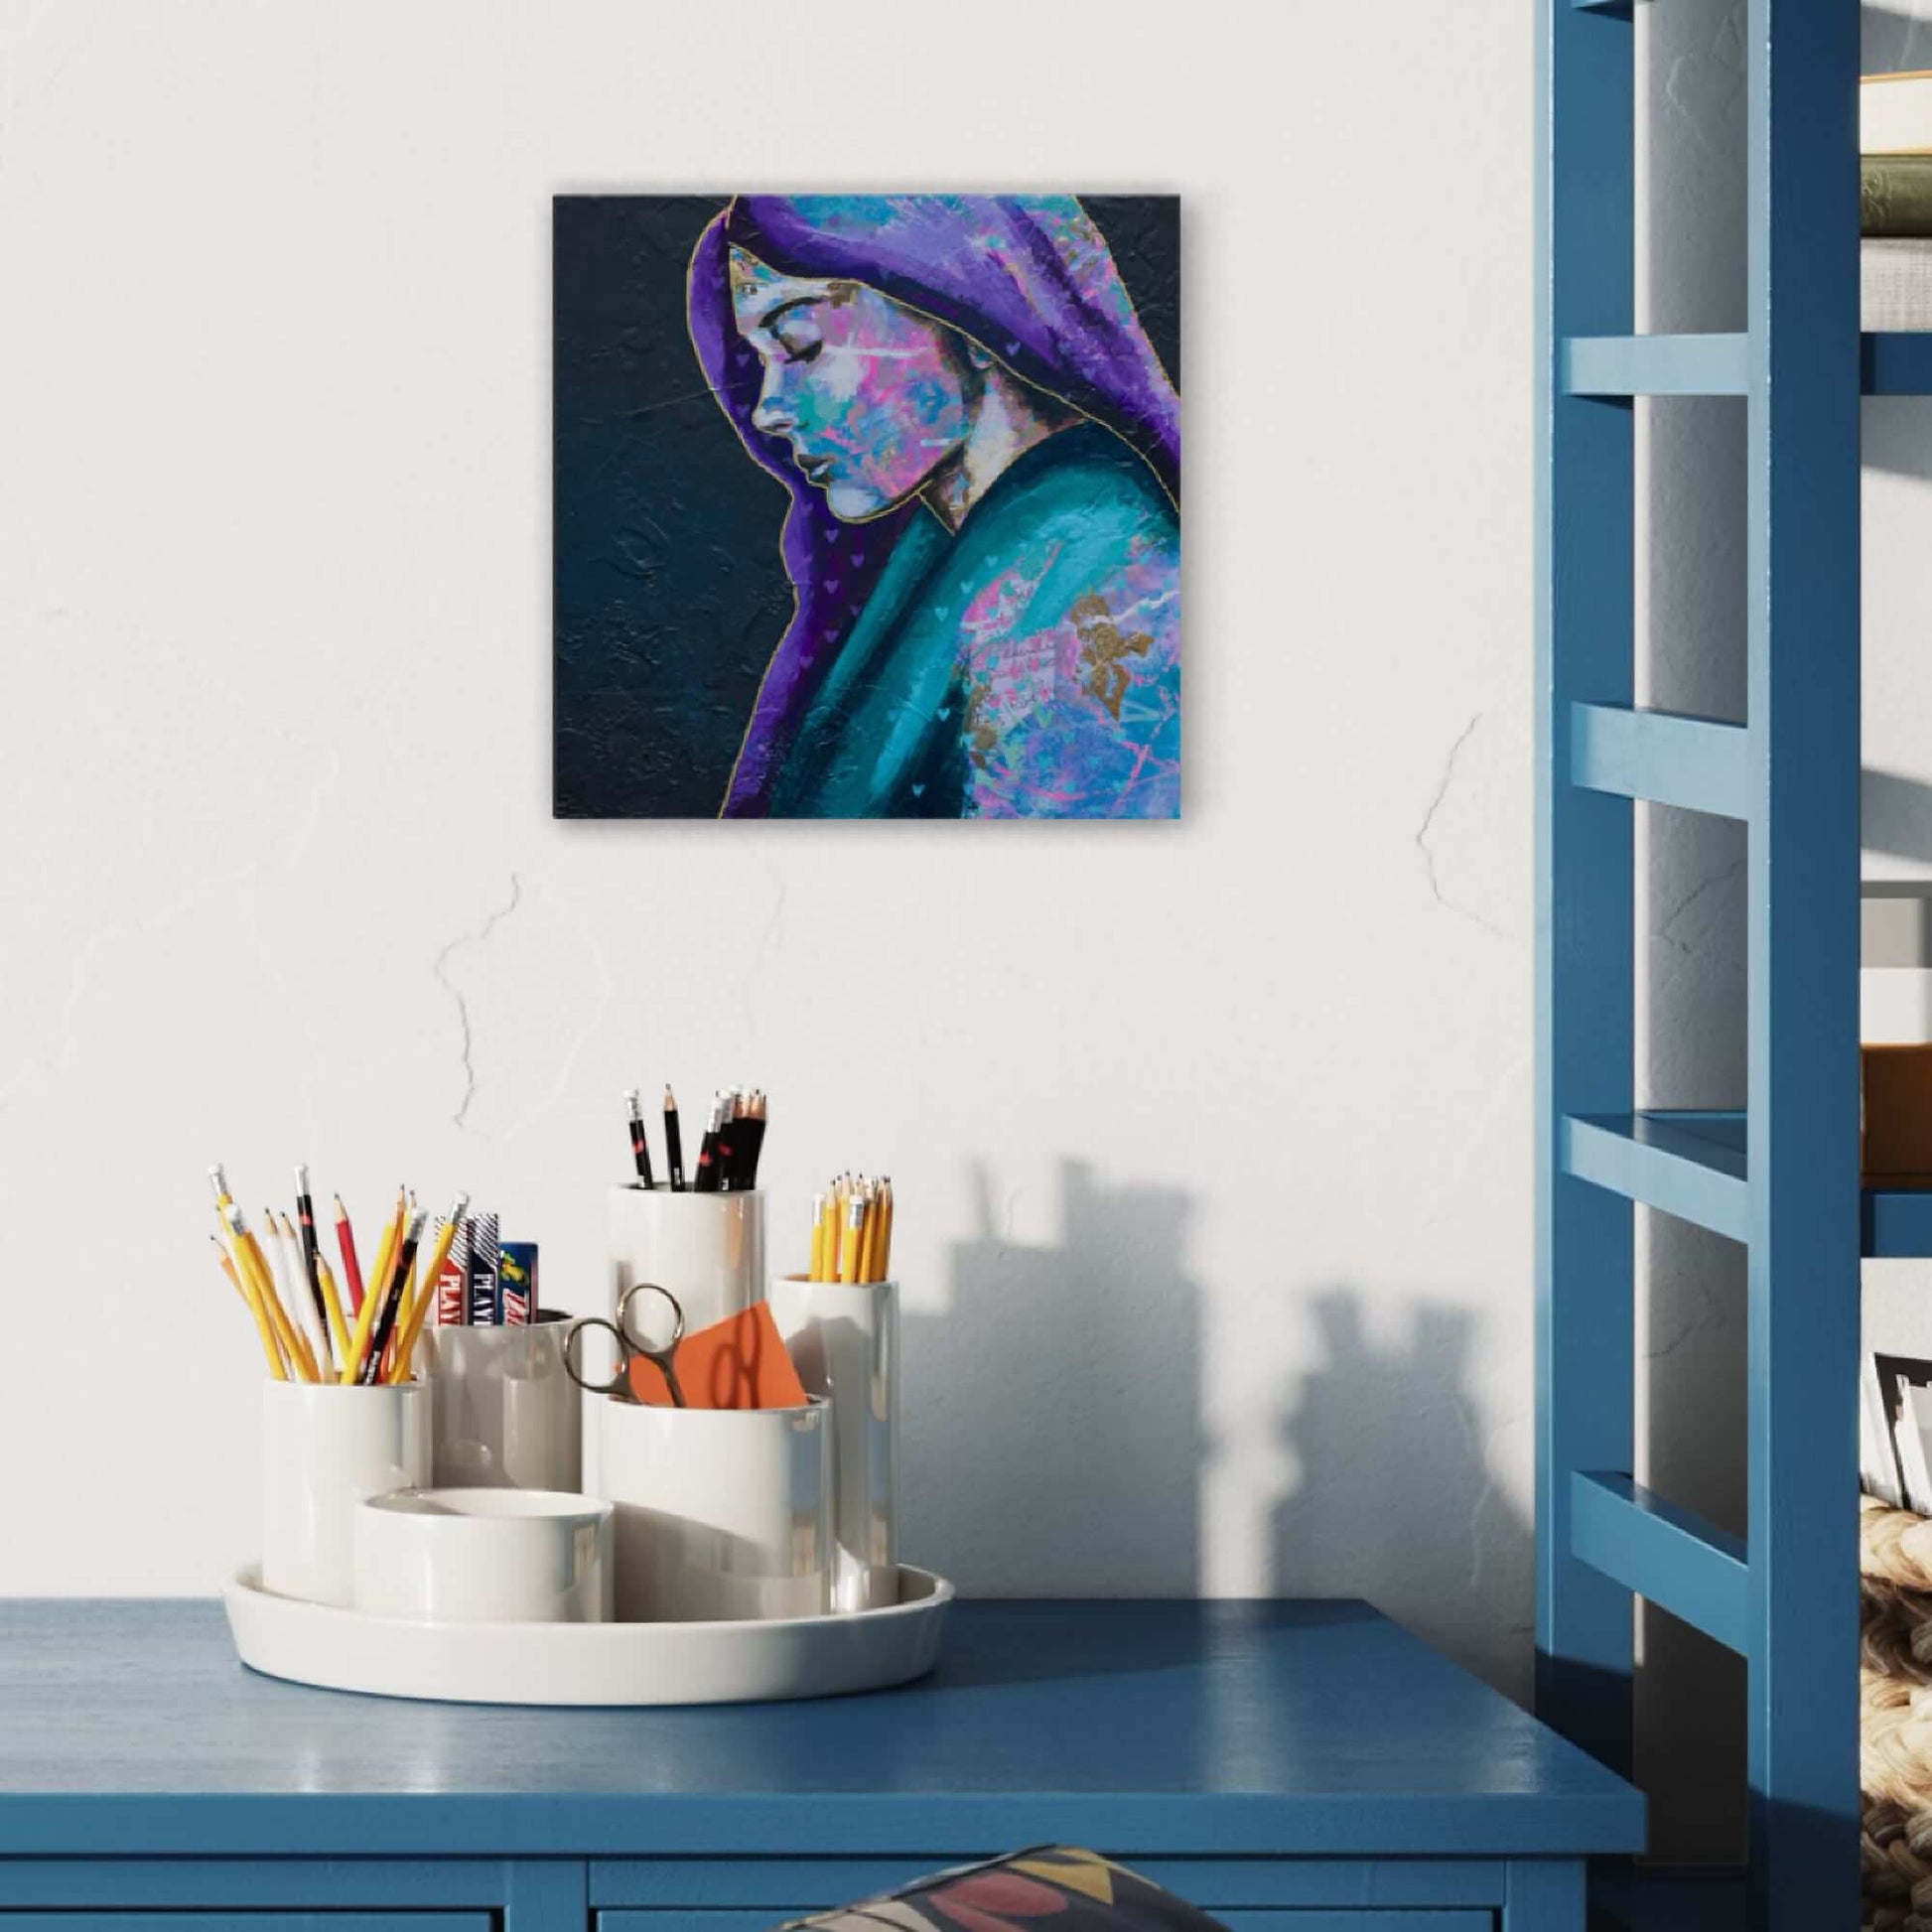 Abstract Art Painting Mixed Media Art For Sale in Melbourne, Blue & Gold Painting of a Woman